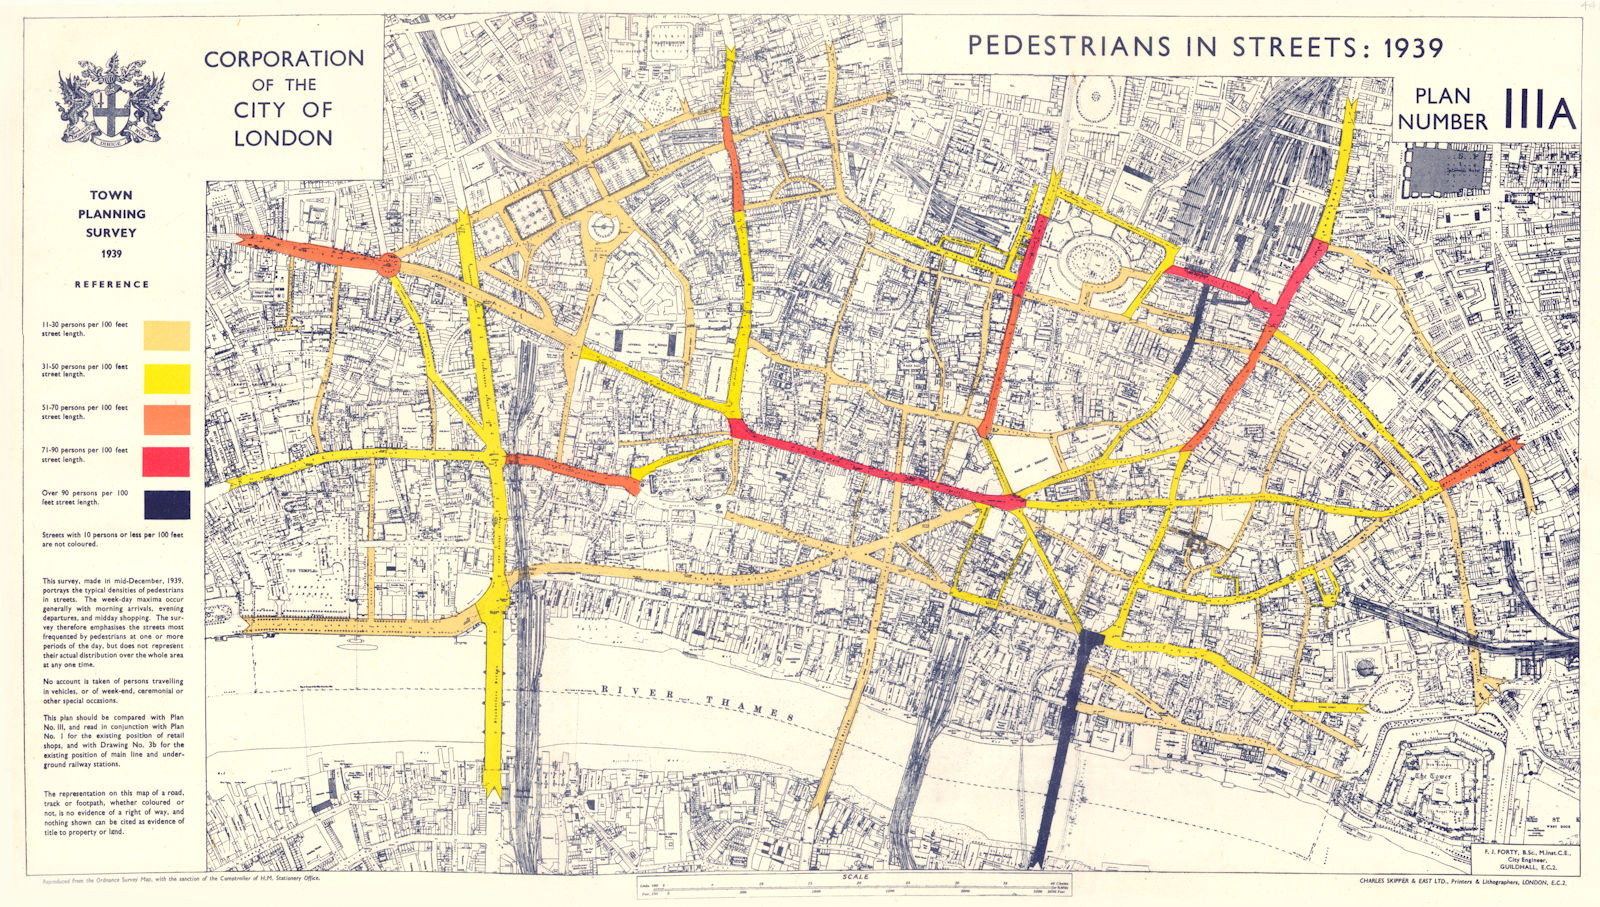 CITY OF LONDON. Town planning survey 1939. PEDESTRIANS IN STREETS 1944 old map